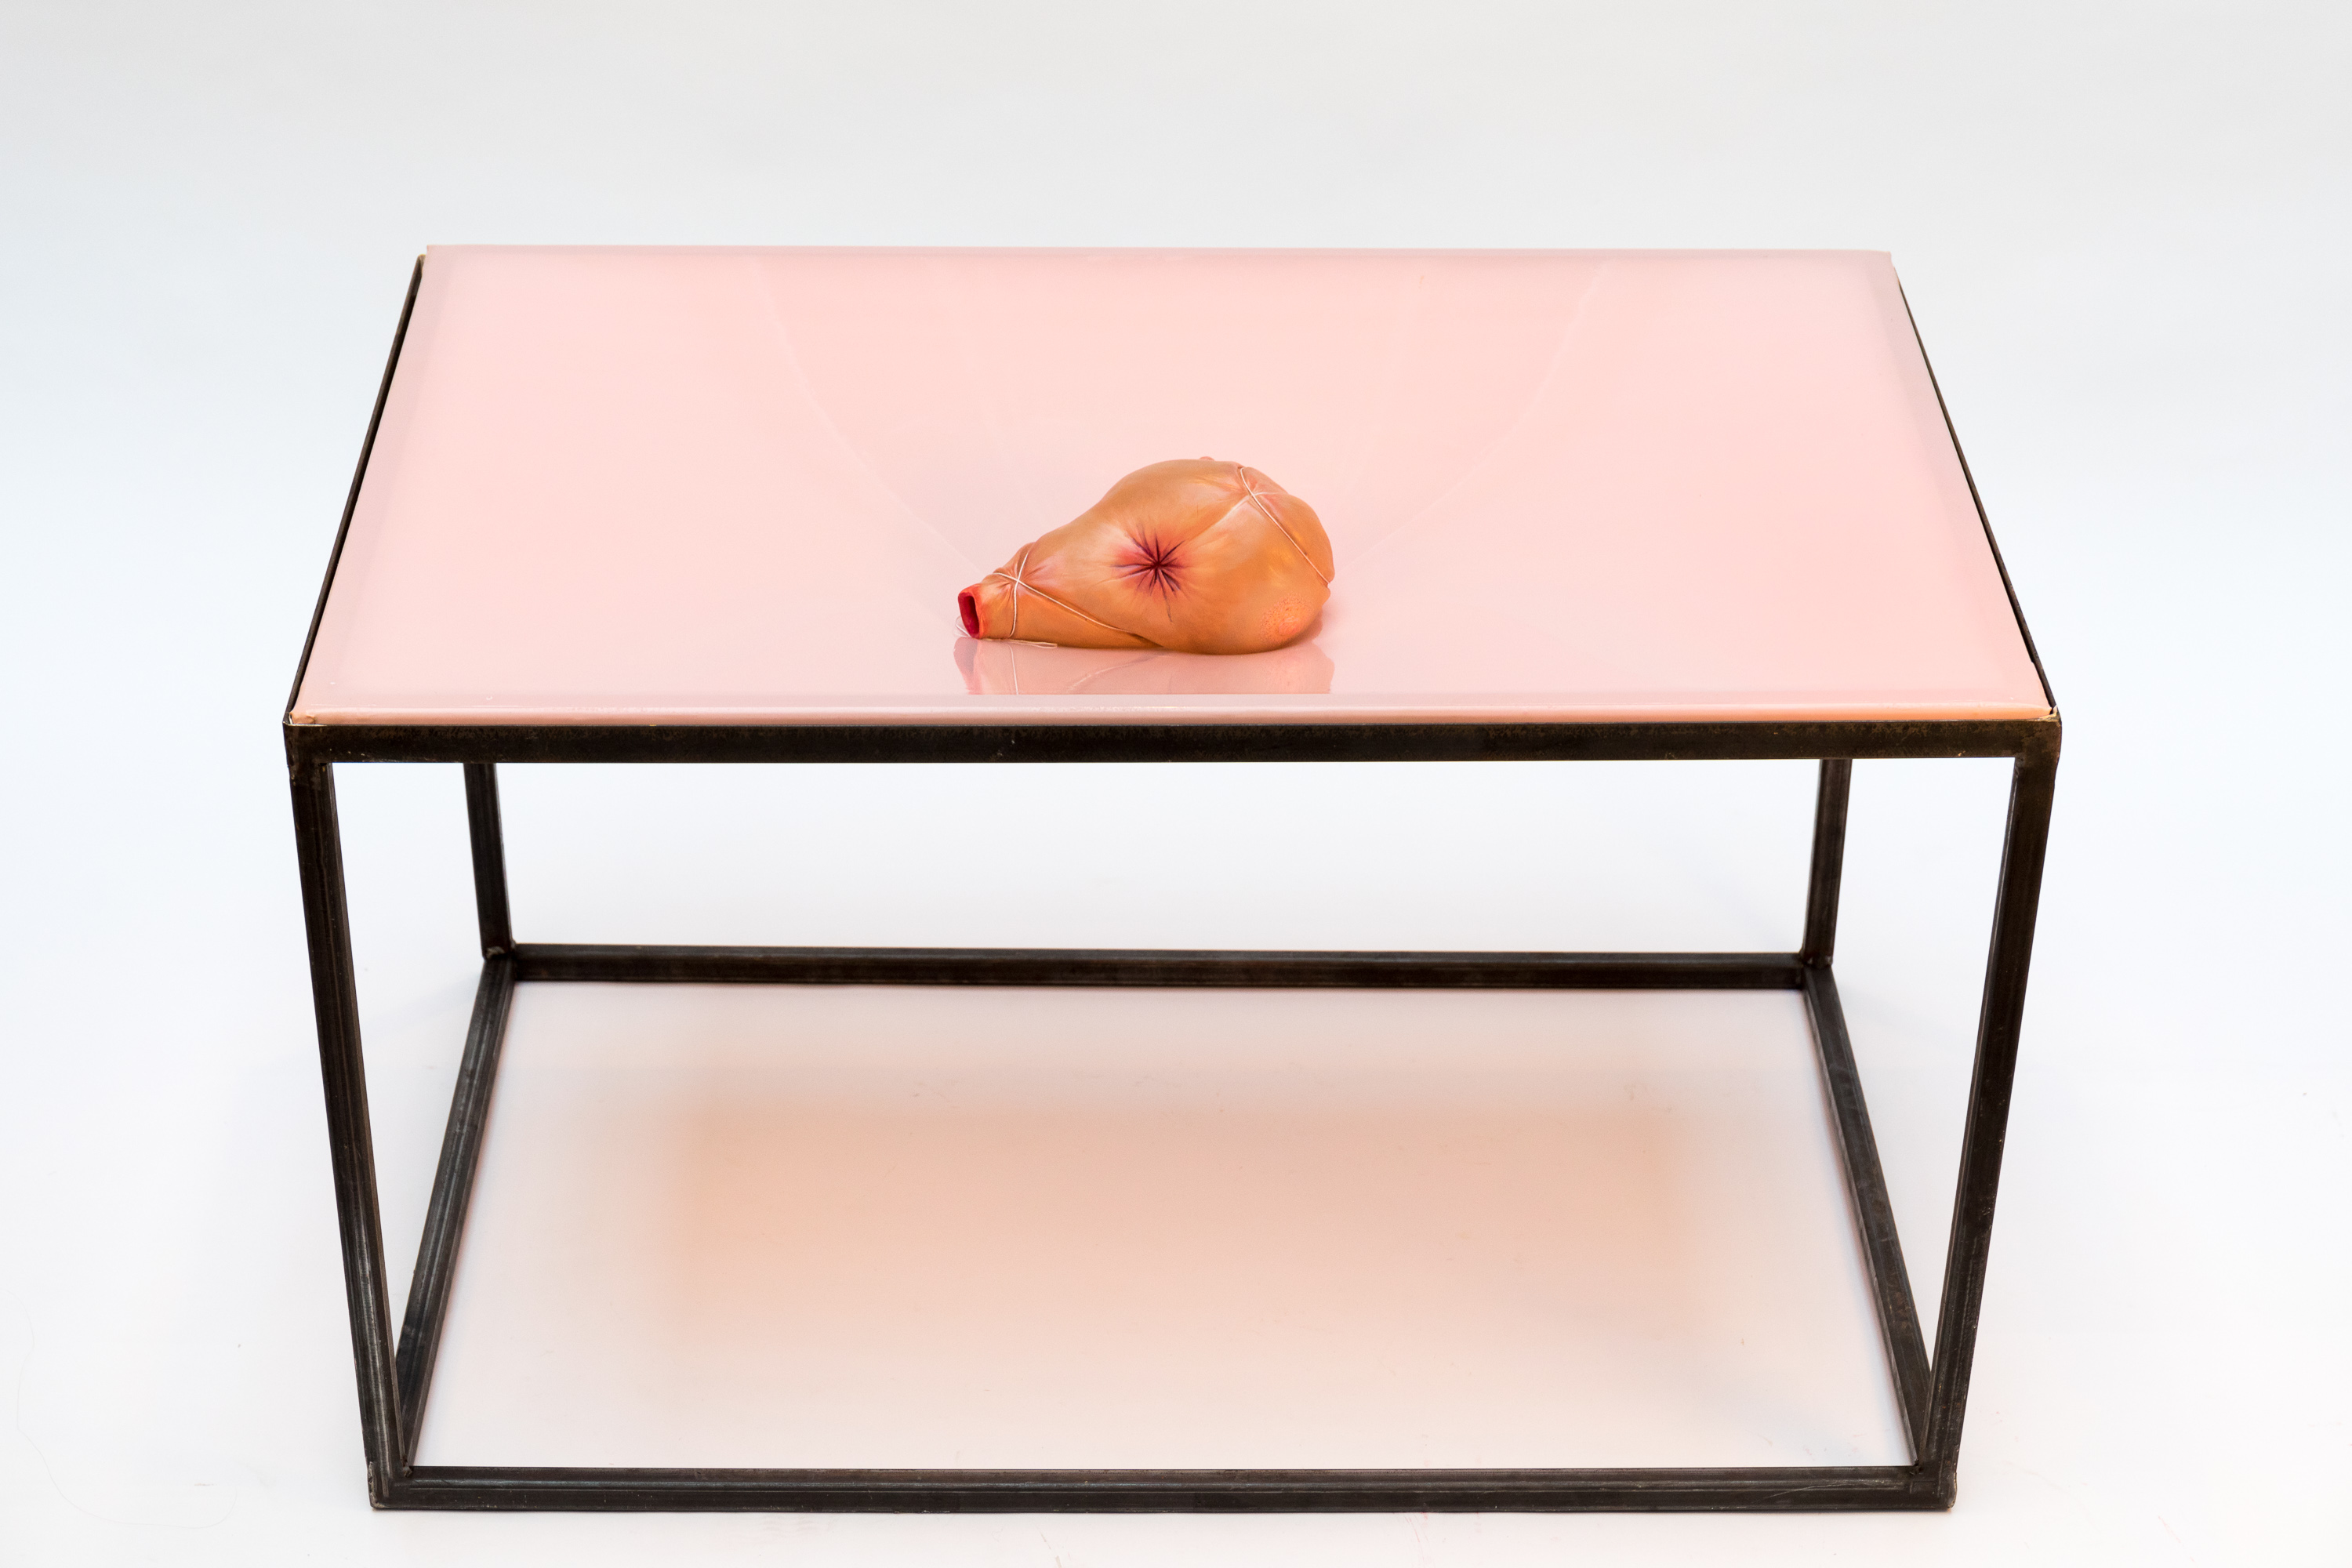 a body part on a table 